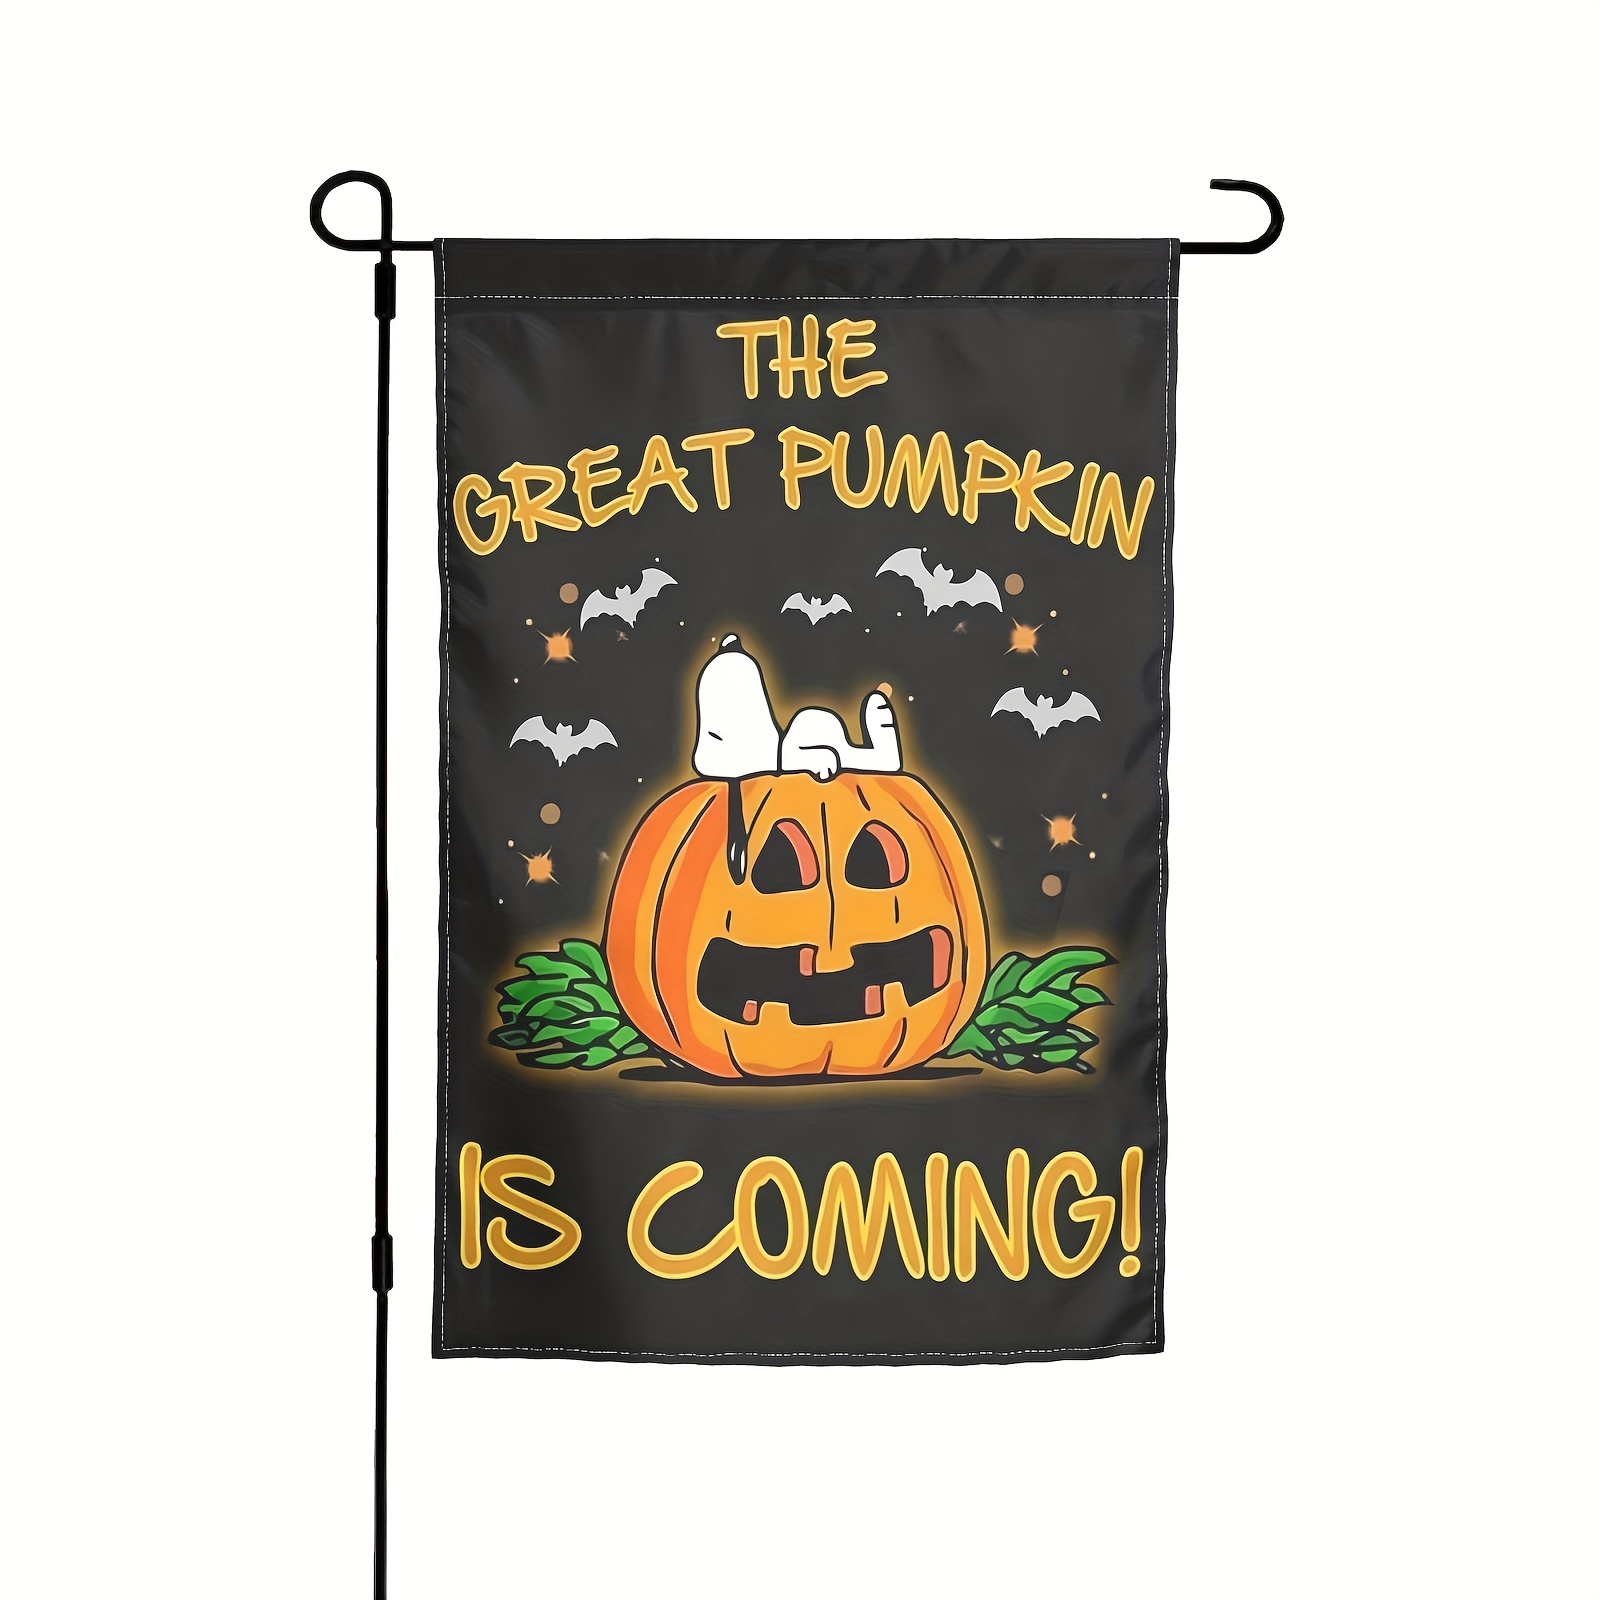 

Halloween Garden Flag - Double-sided Print Polyester Pumpkin Ghost Outdoor Patio Decor, Festive Yard Banner, Easy Hang, No Pole Included, 12x18 Inch